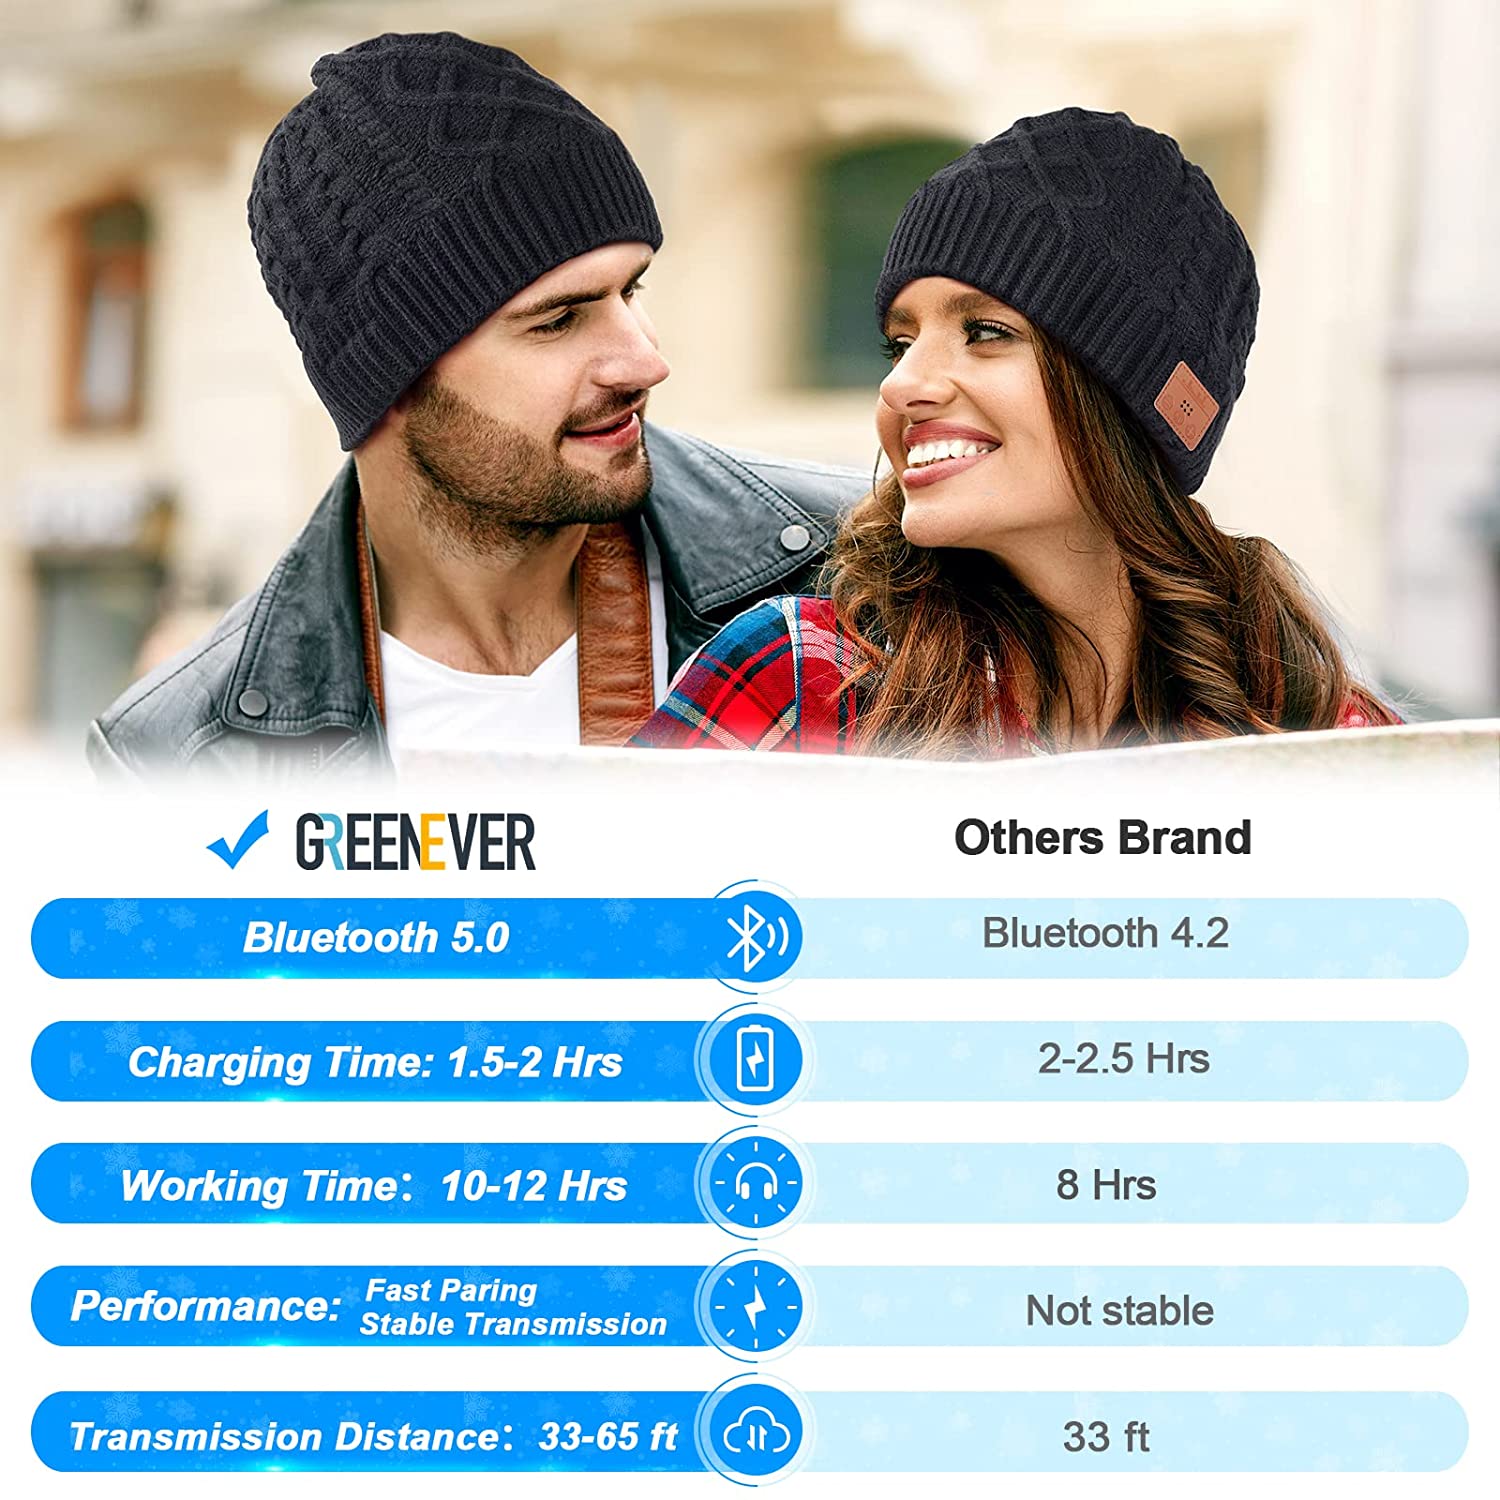 Buy Bluetooth Beanie Hat for Men Women - Stocking Stuffers Gifts Idea for  Men, Bluetooth 5.0 Warm Cap with Headphones for Him Her Teenagers Teen Boys  Girls, Gifts for Christmas Birthday (Grey)